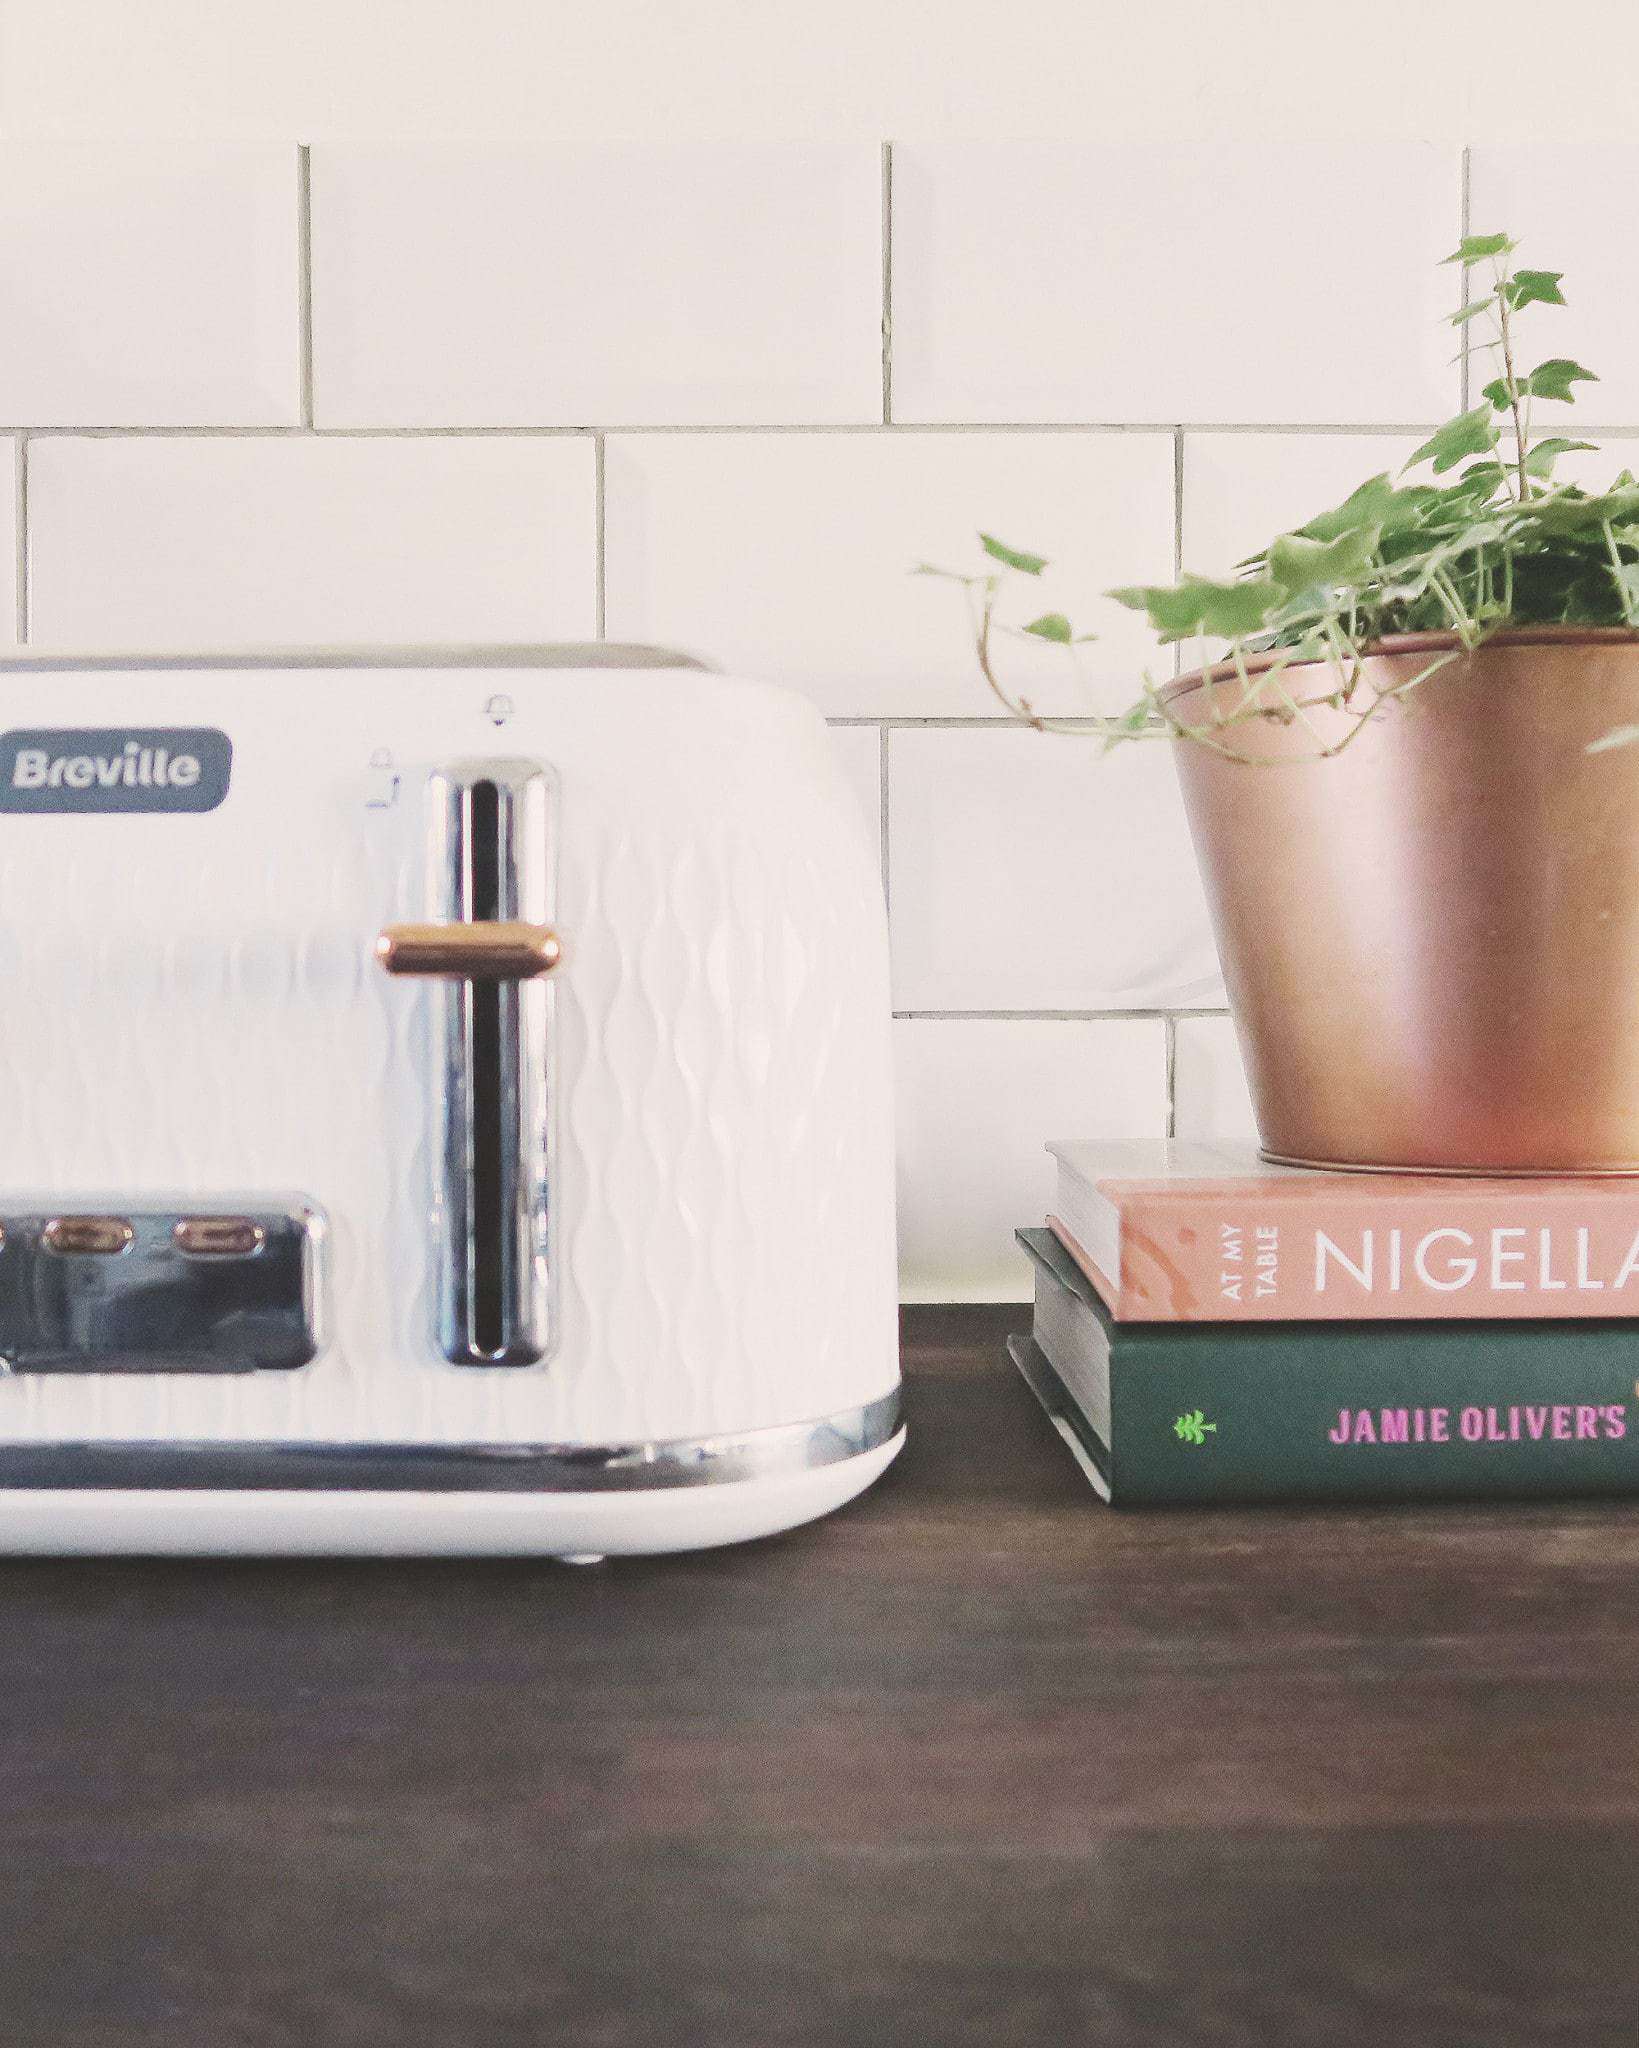 https://thelistedhome.co.uk/wp-content/uploads/2018/01/introducing-the-breville-curve-toaster-and-kettle-cookbooks-scaled.jpg